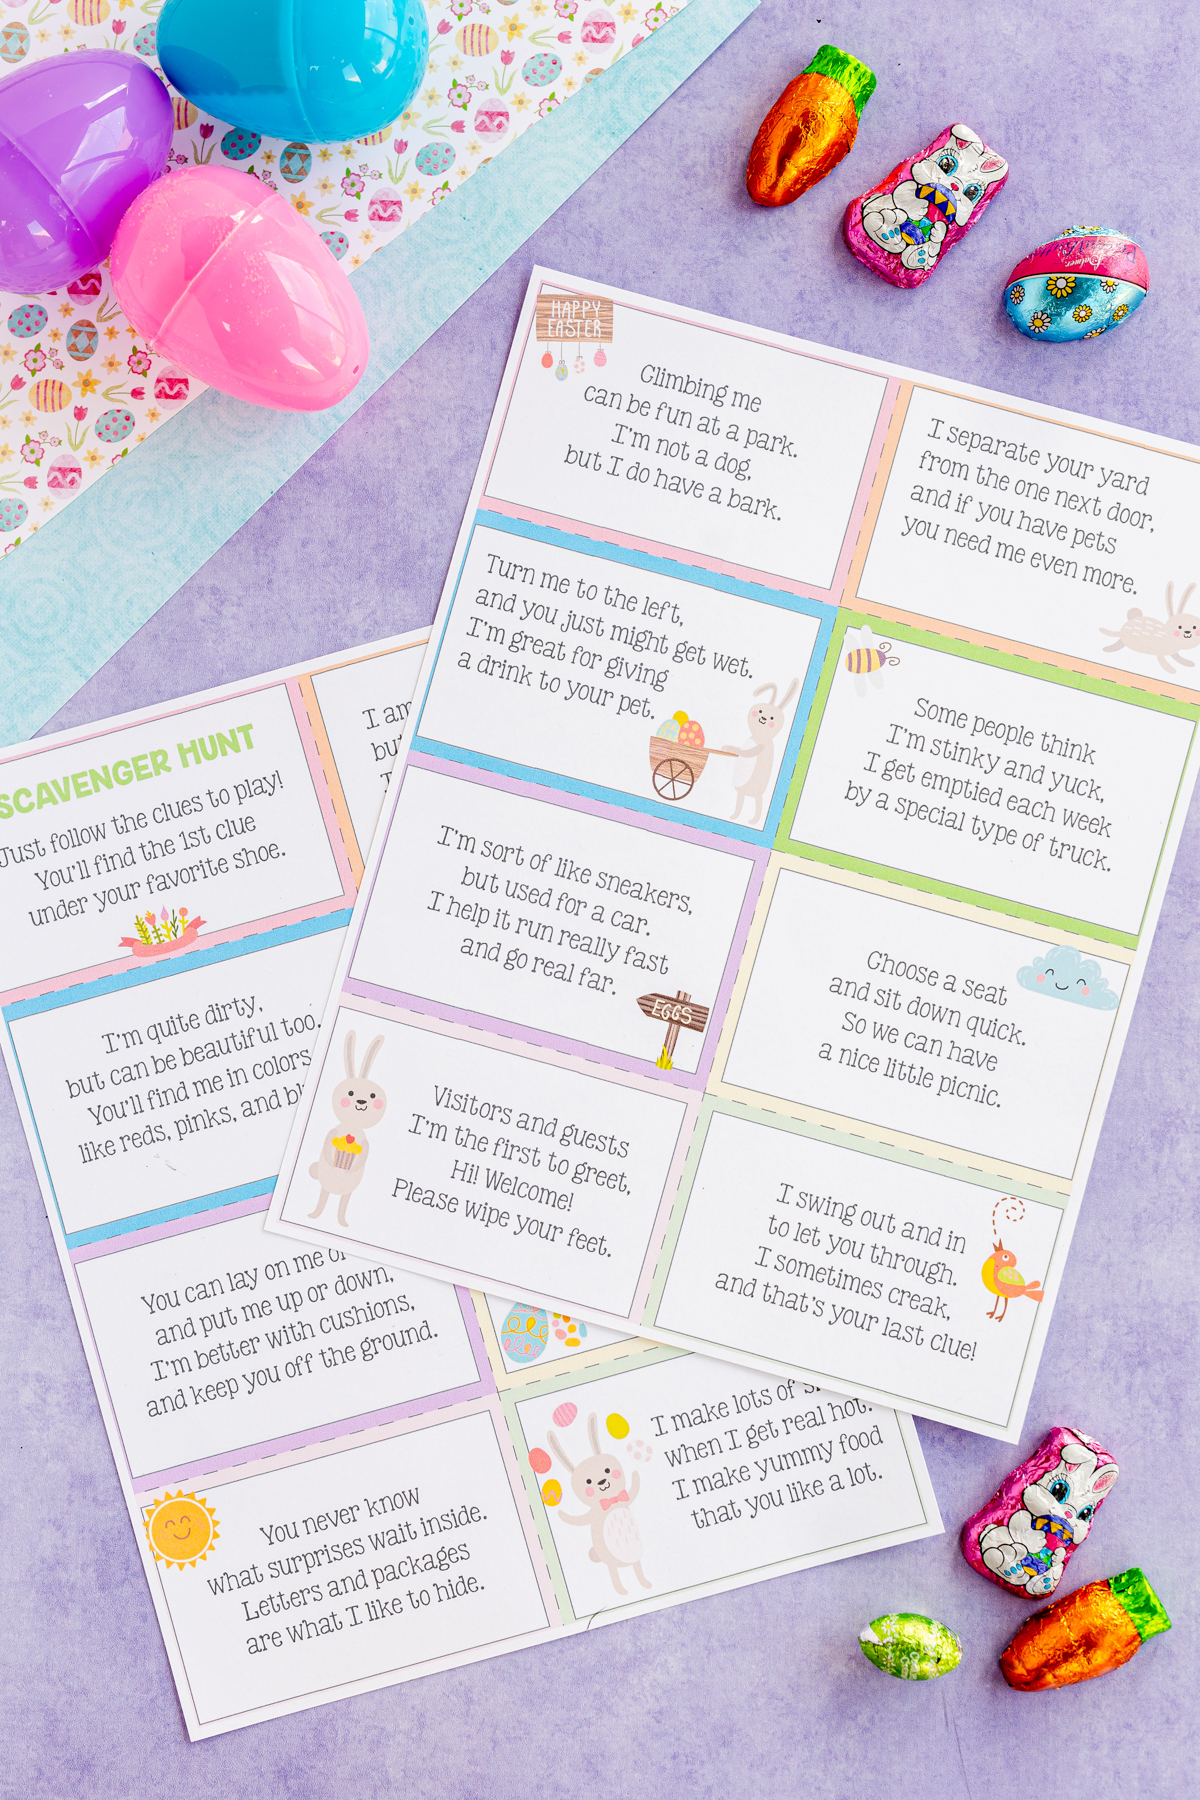 printed out Easter egg hunt clues for kids